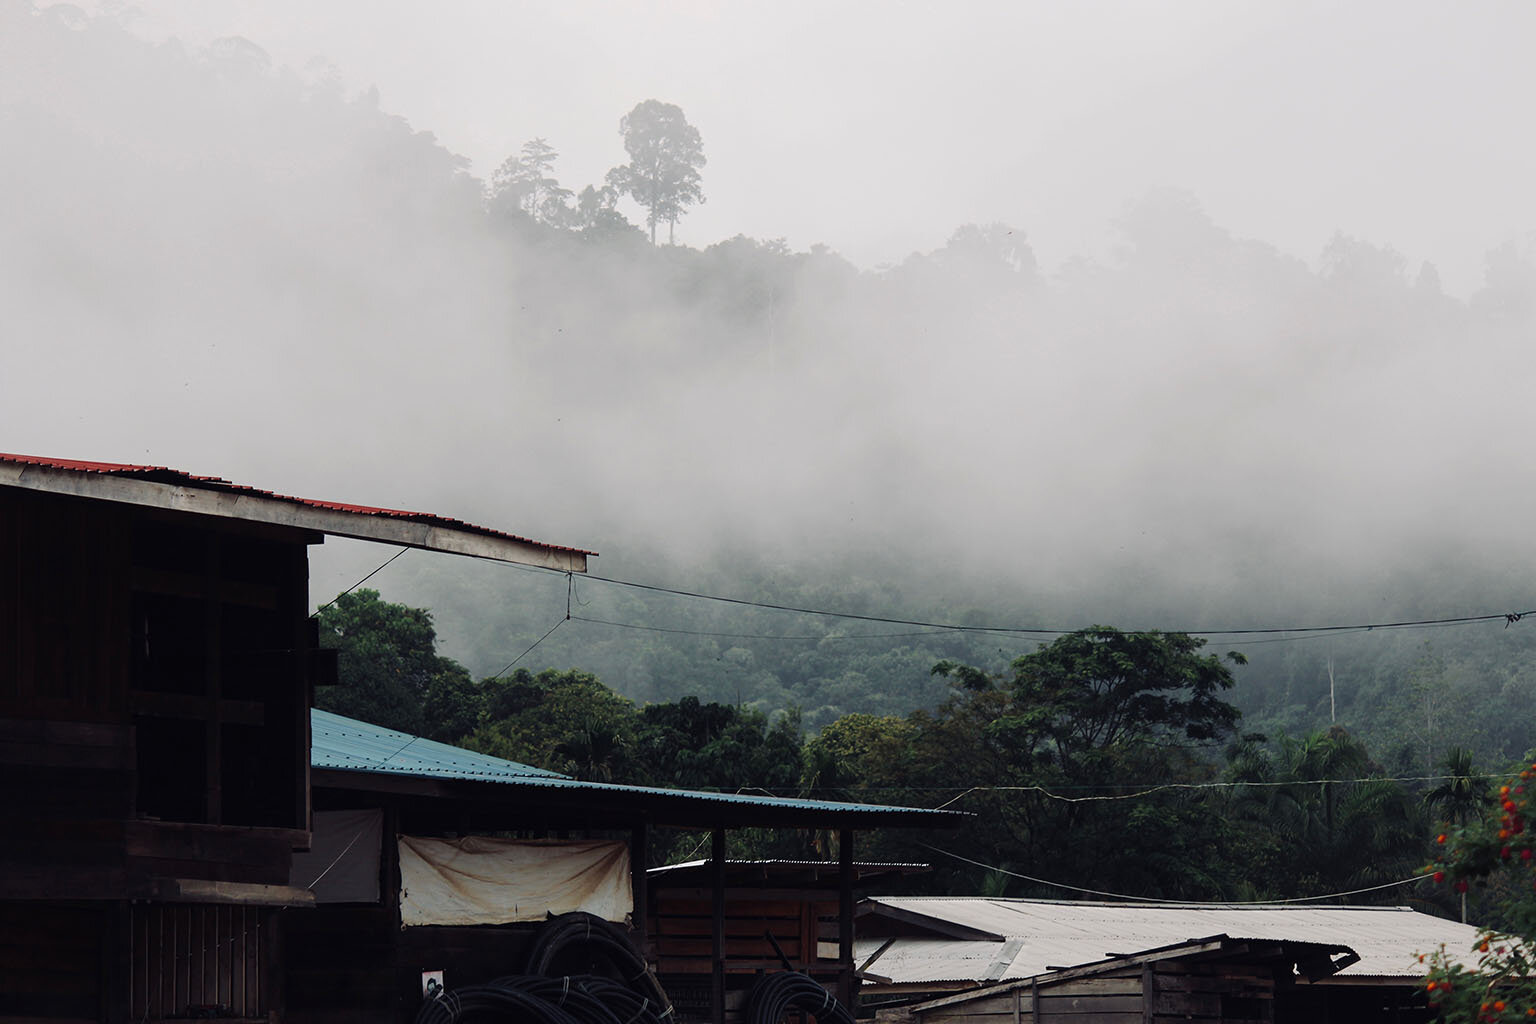 Long Siut, an Indigenous village, in July 2018. Photo credit: Fiona McAlpine of The Borneo Project